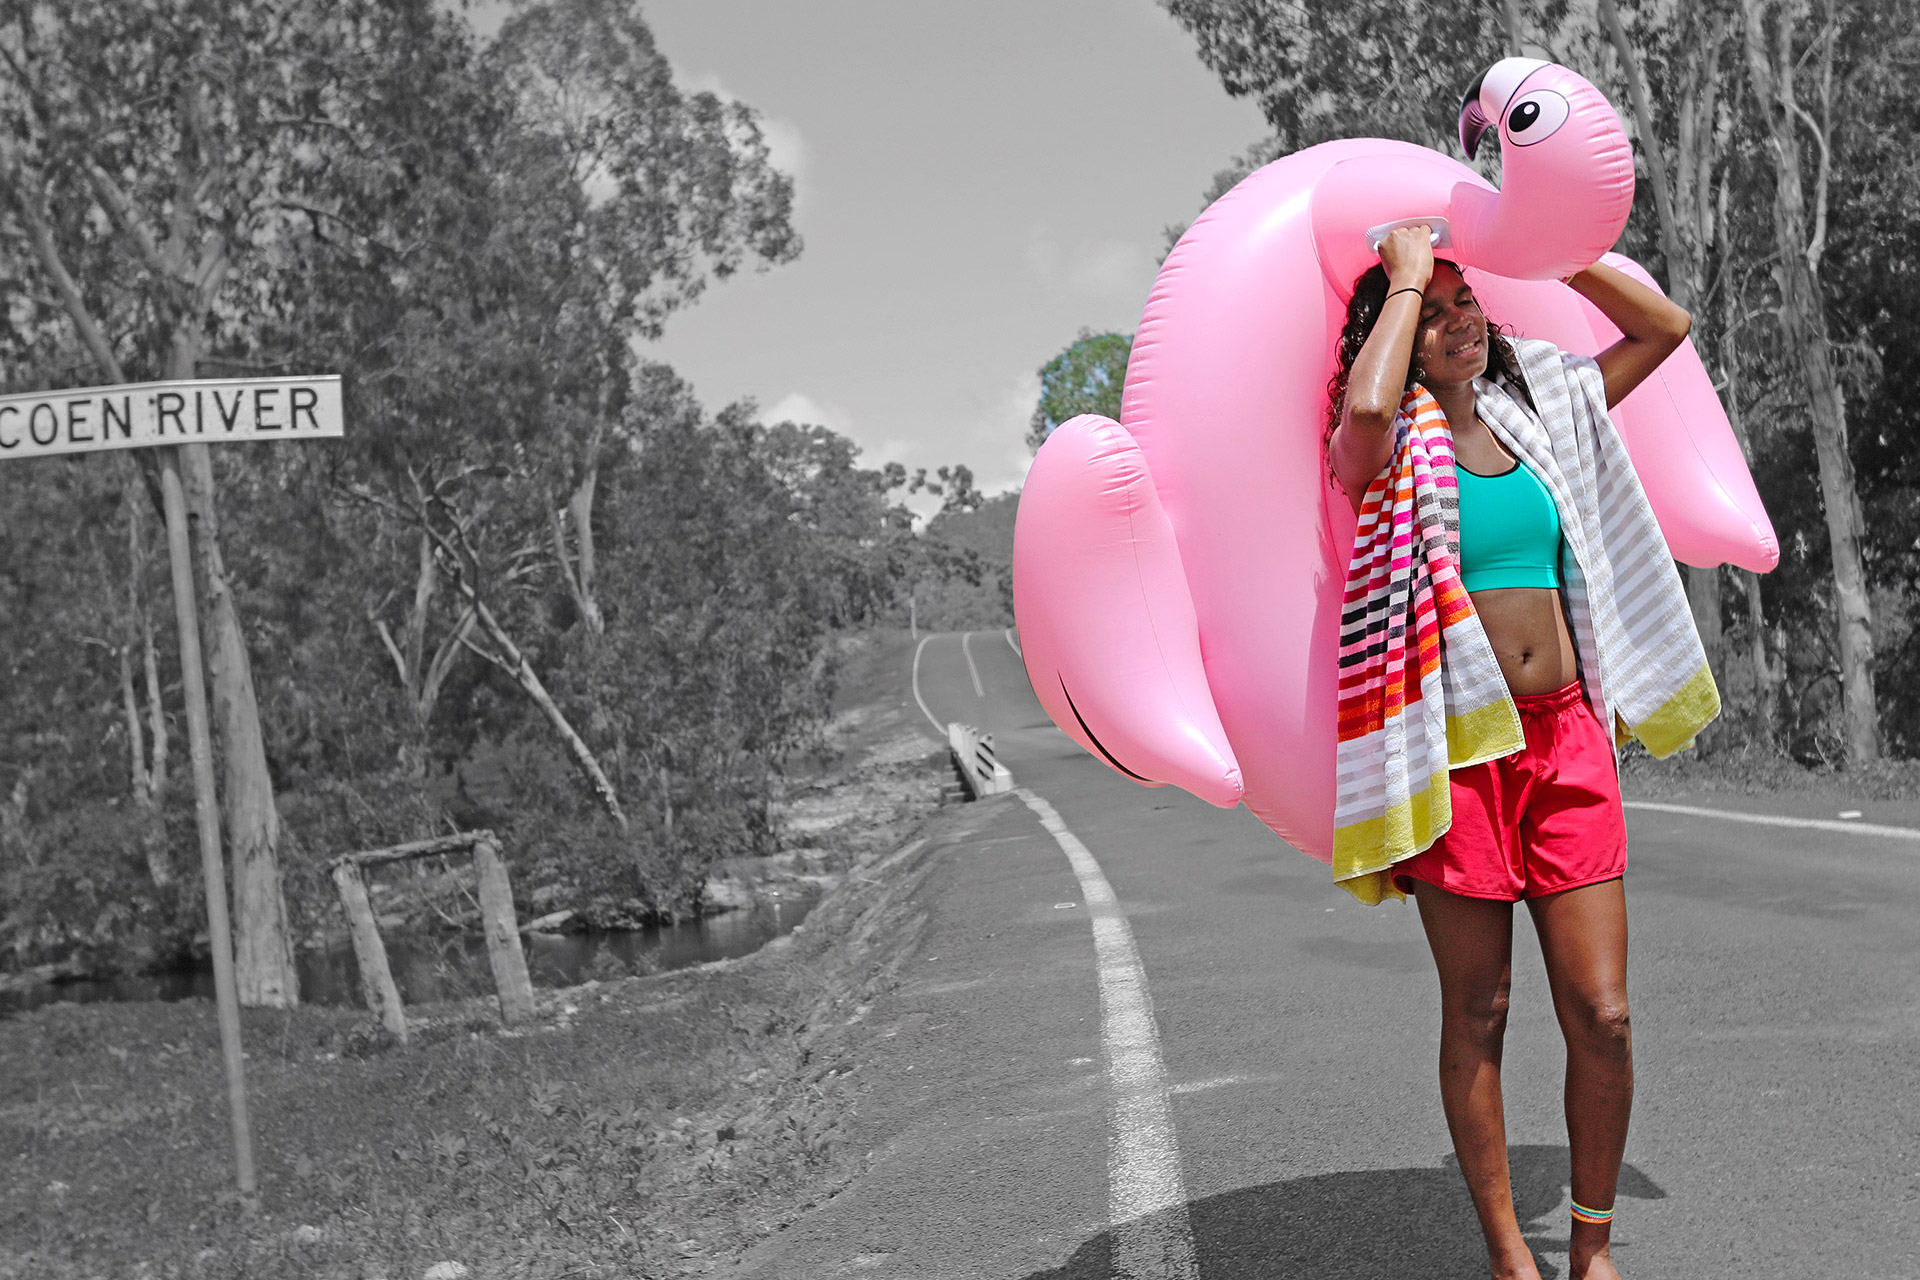 Girl walking down the street carrying an inflatable flamingo